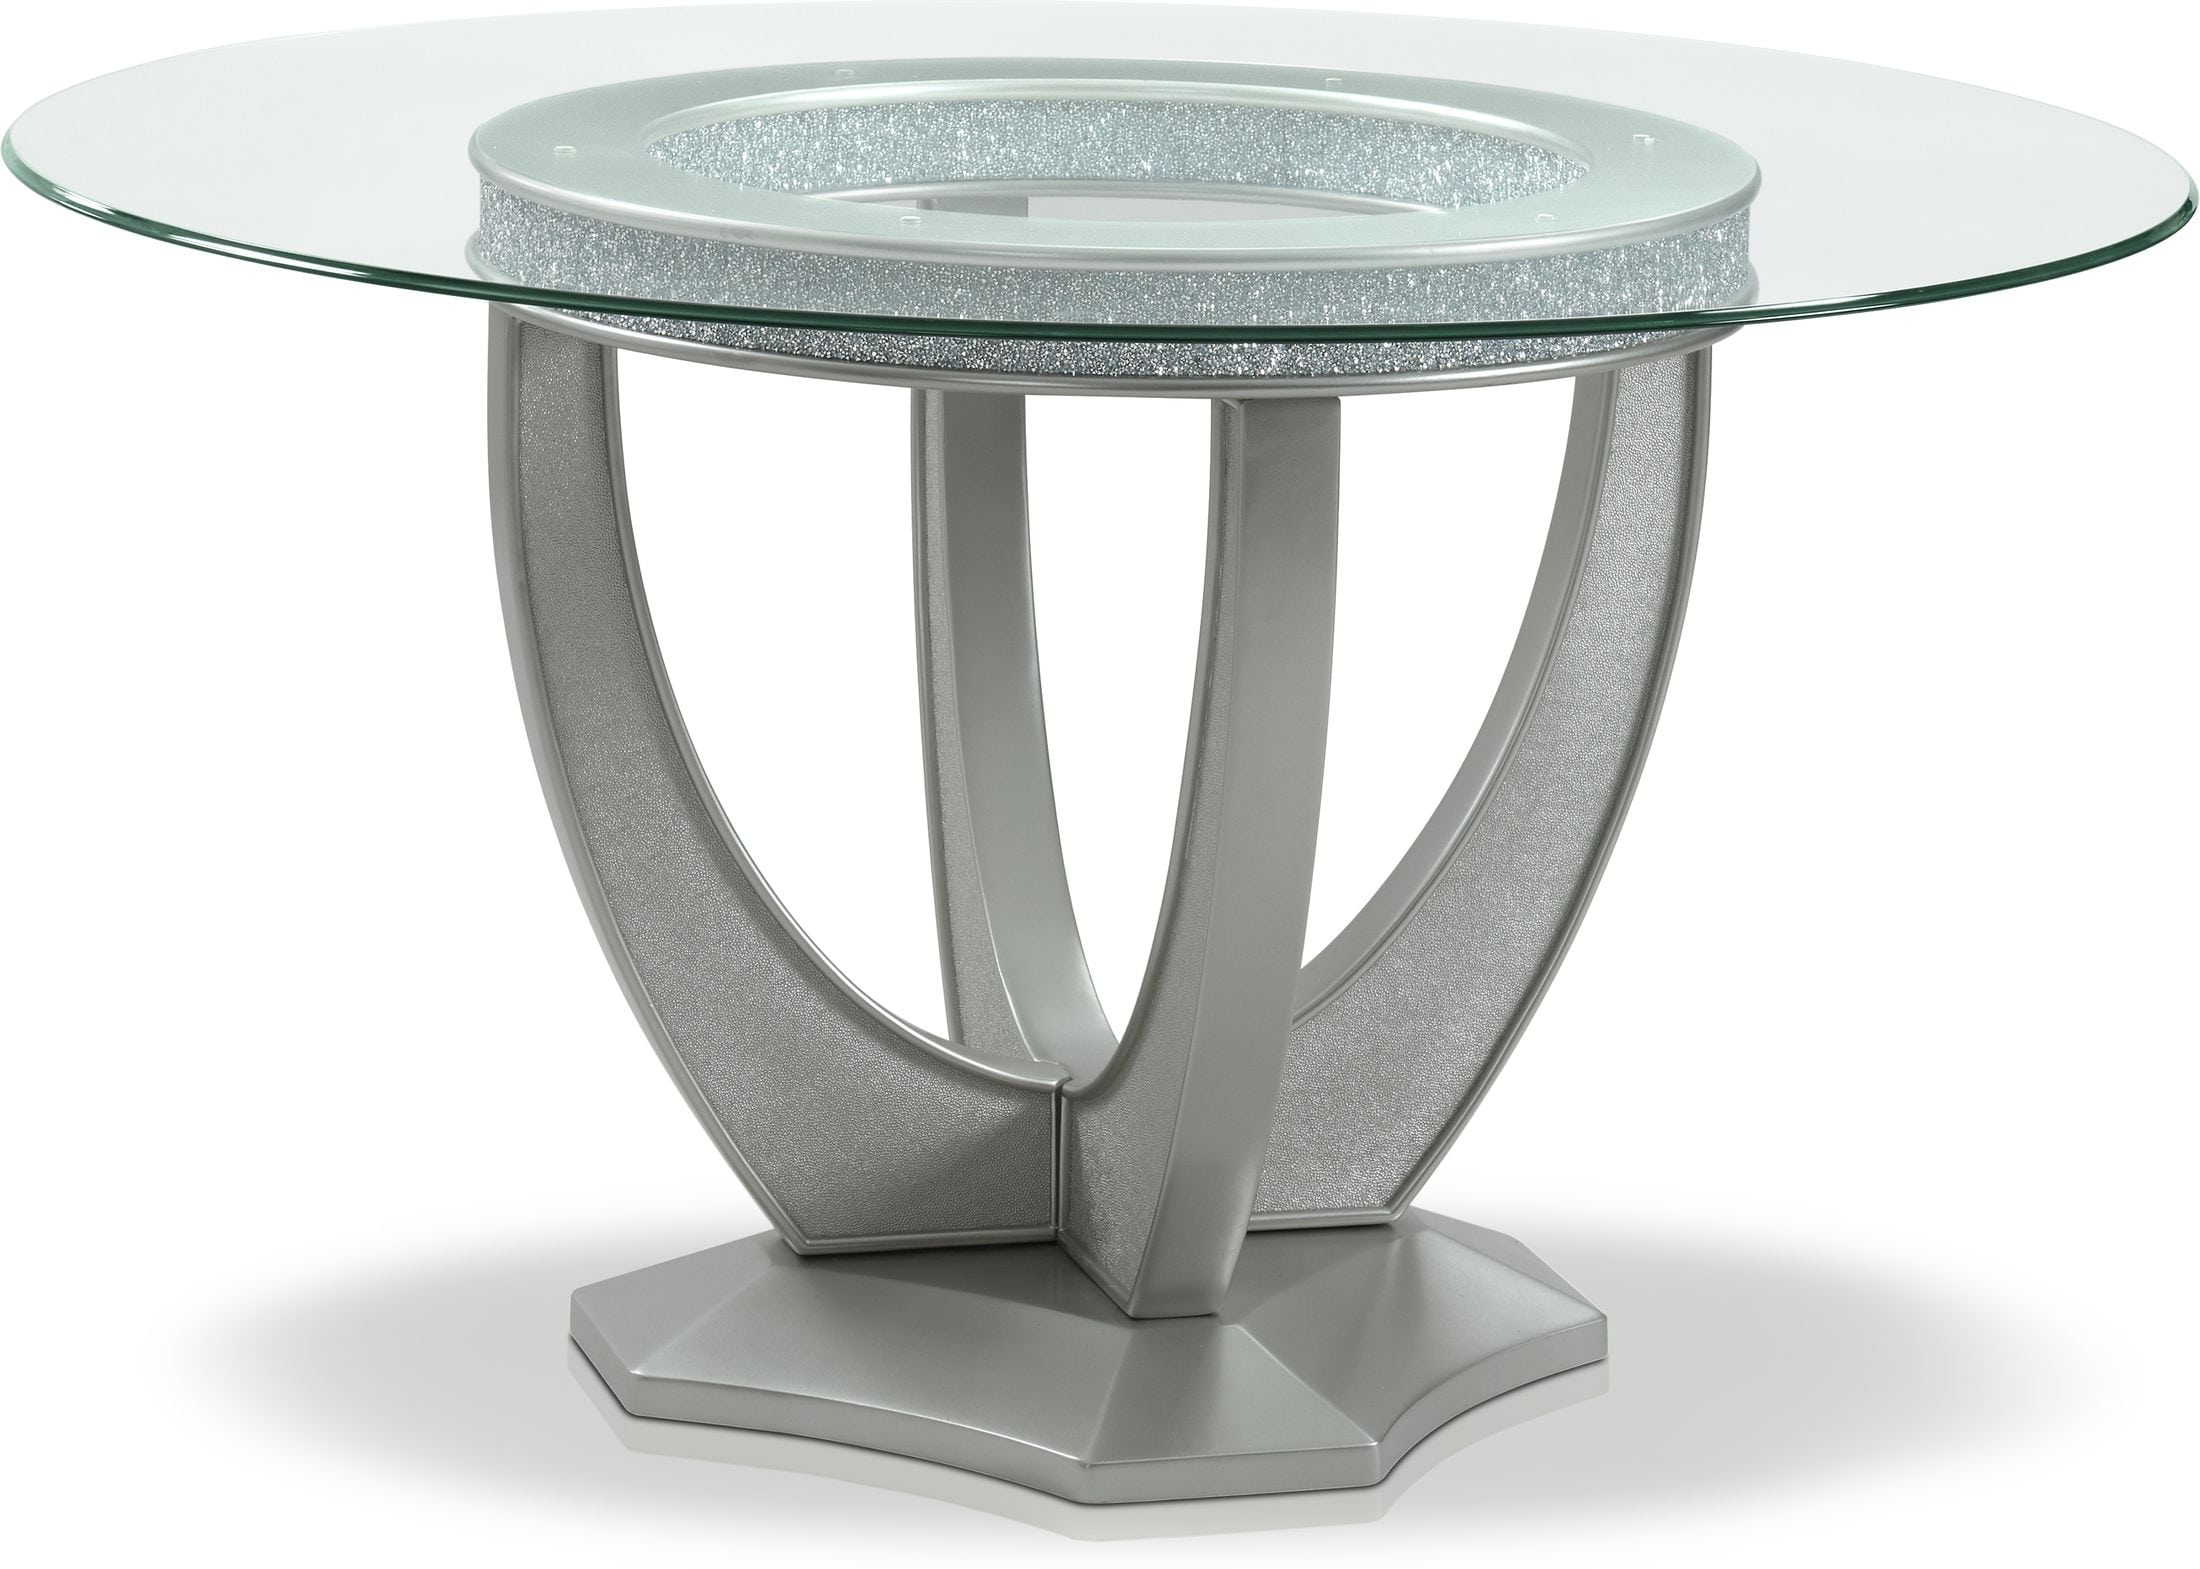 Posh Round Dining Table | Value City Furniture